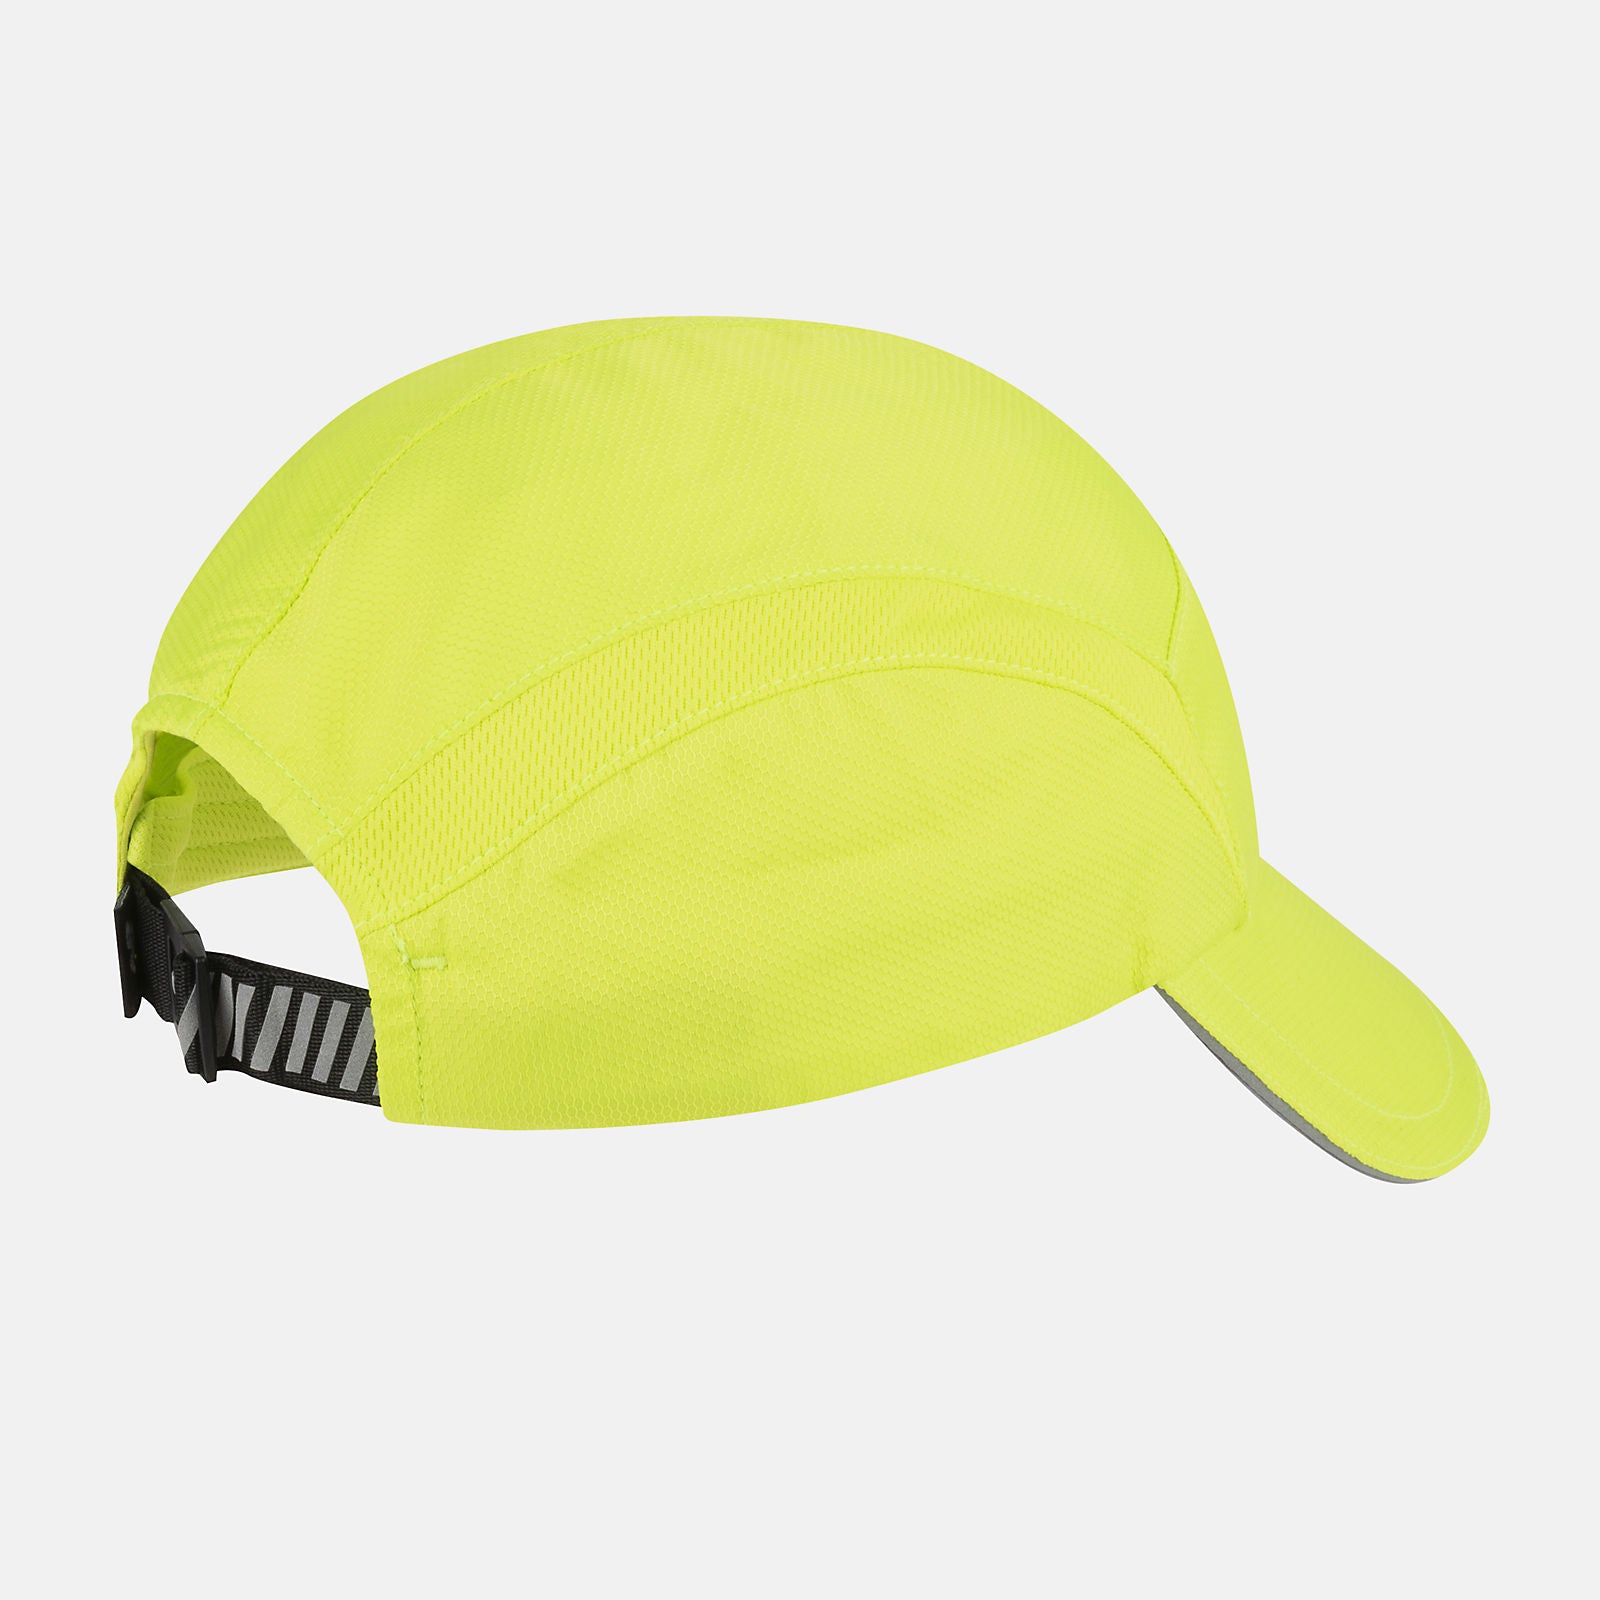 5-Panel Performance Hat in Yellow